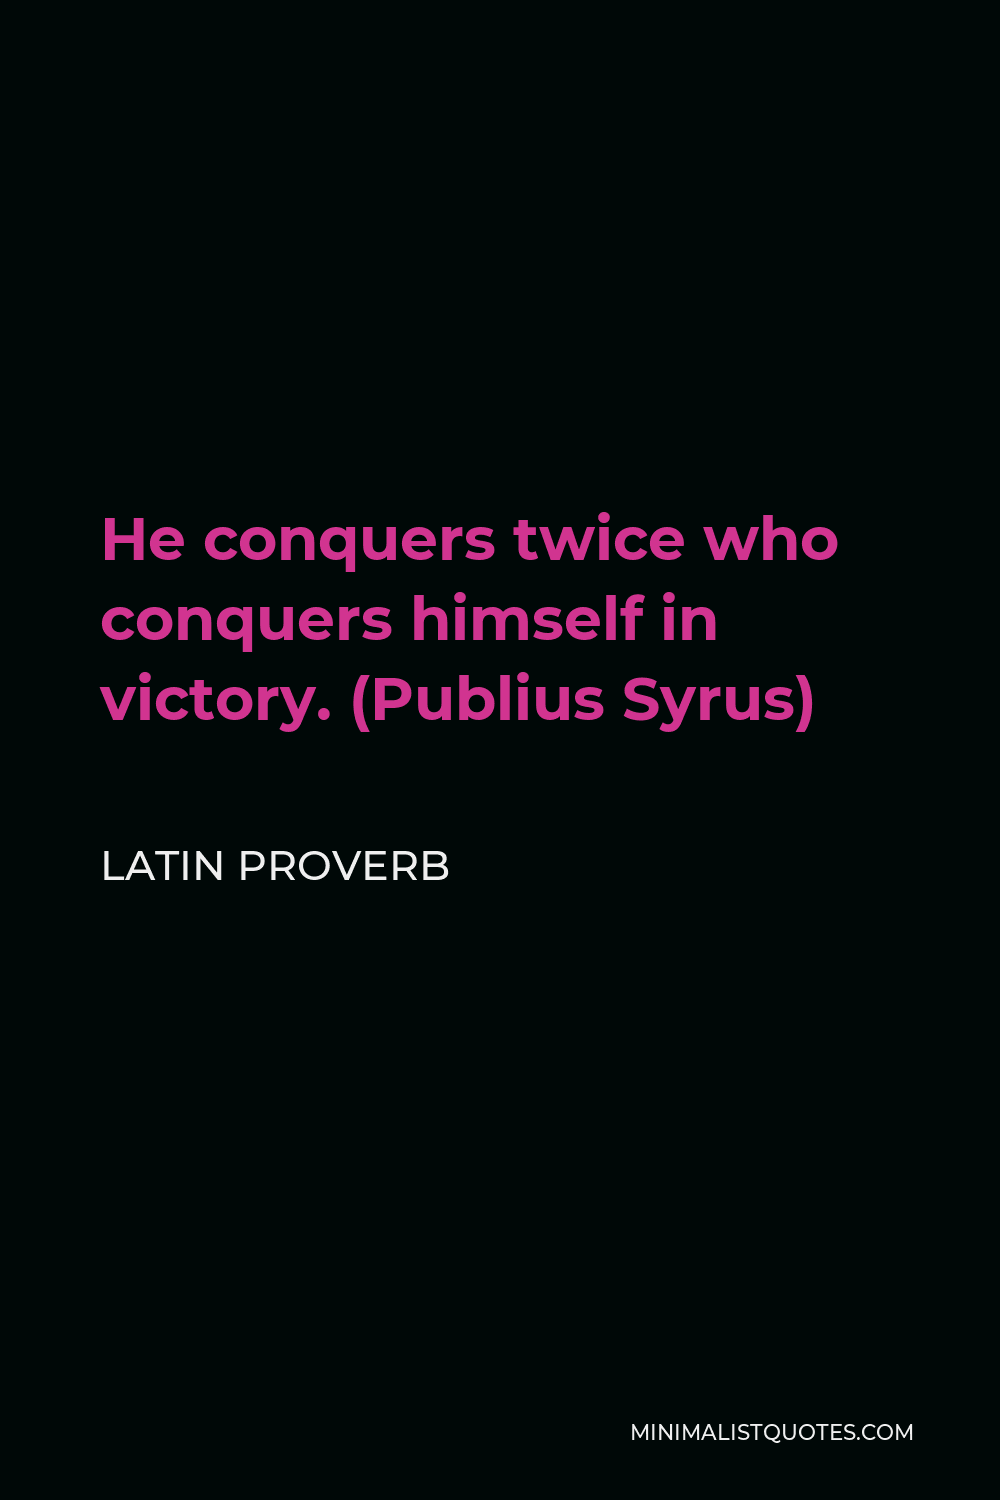 Latin Proverb Quote - He conquers twice who conquers himself in victory. (Publius Syrus)